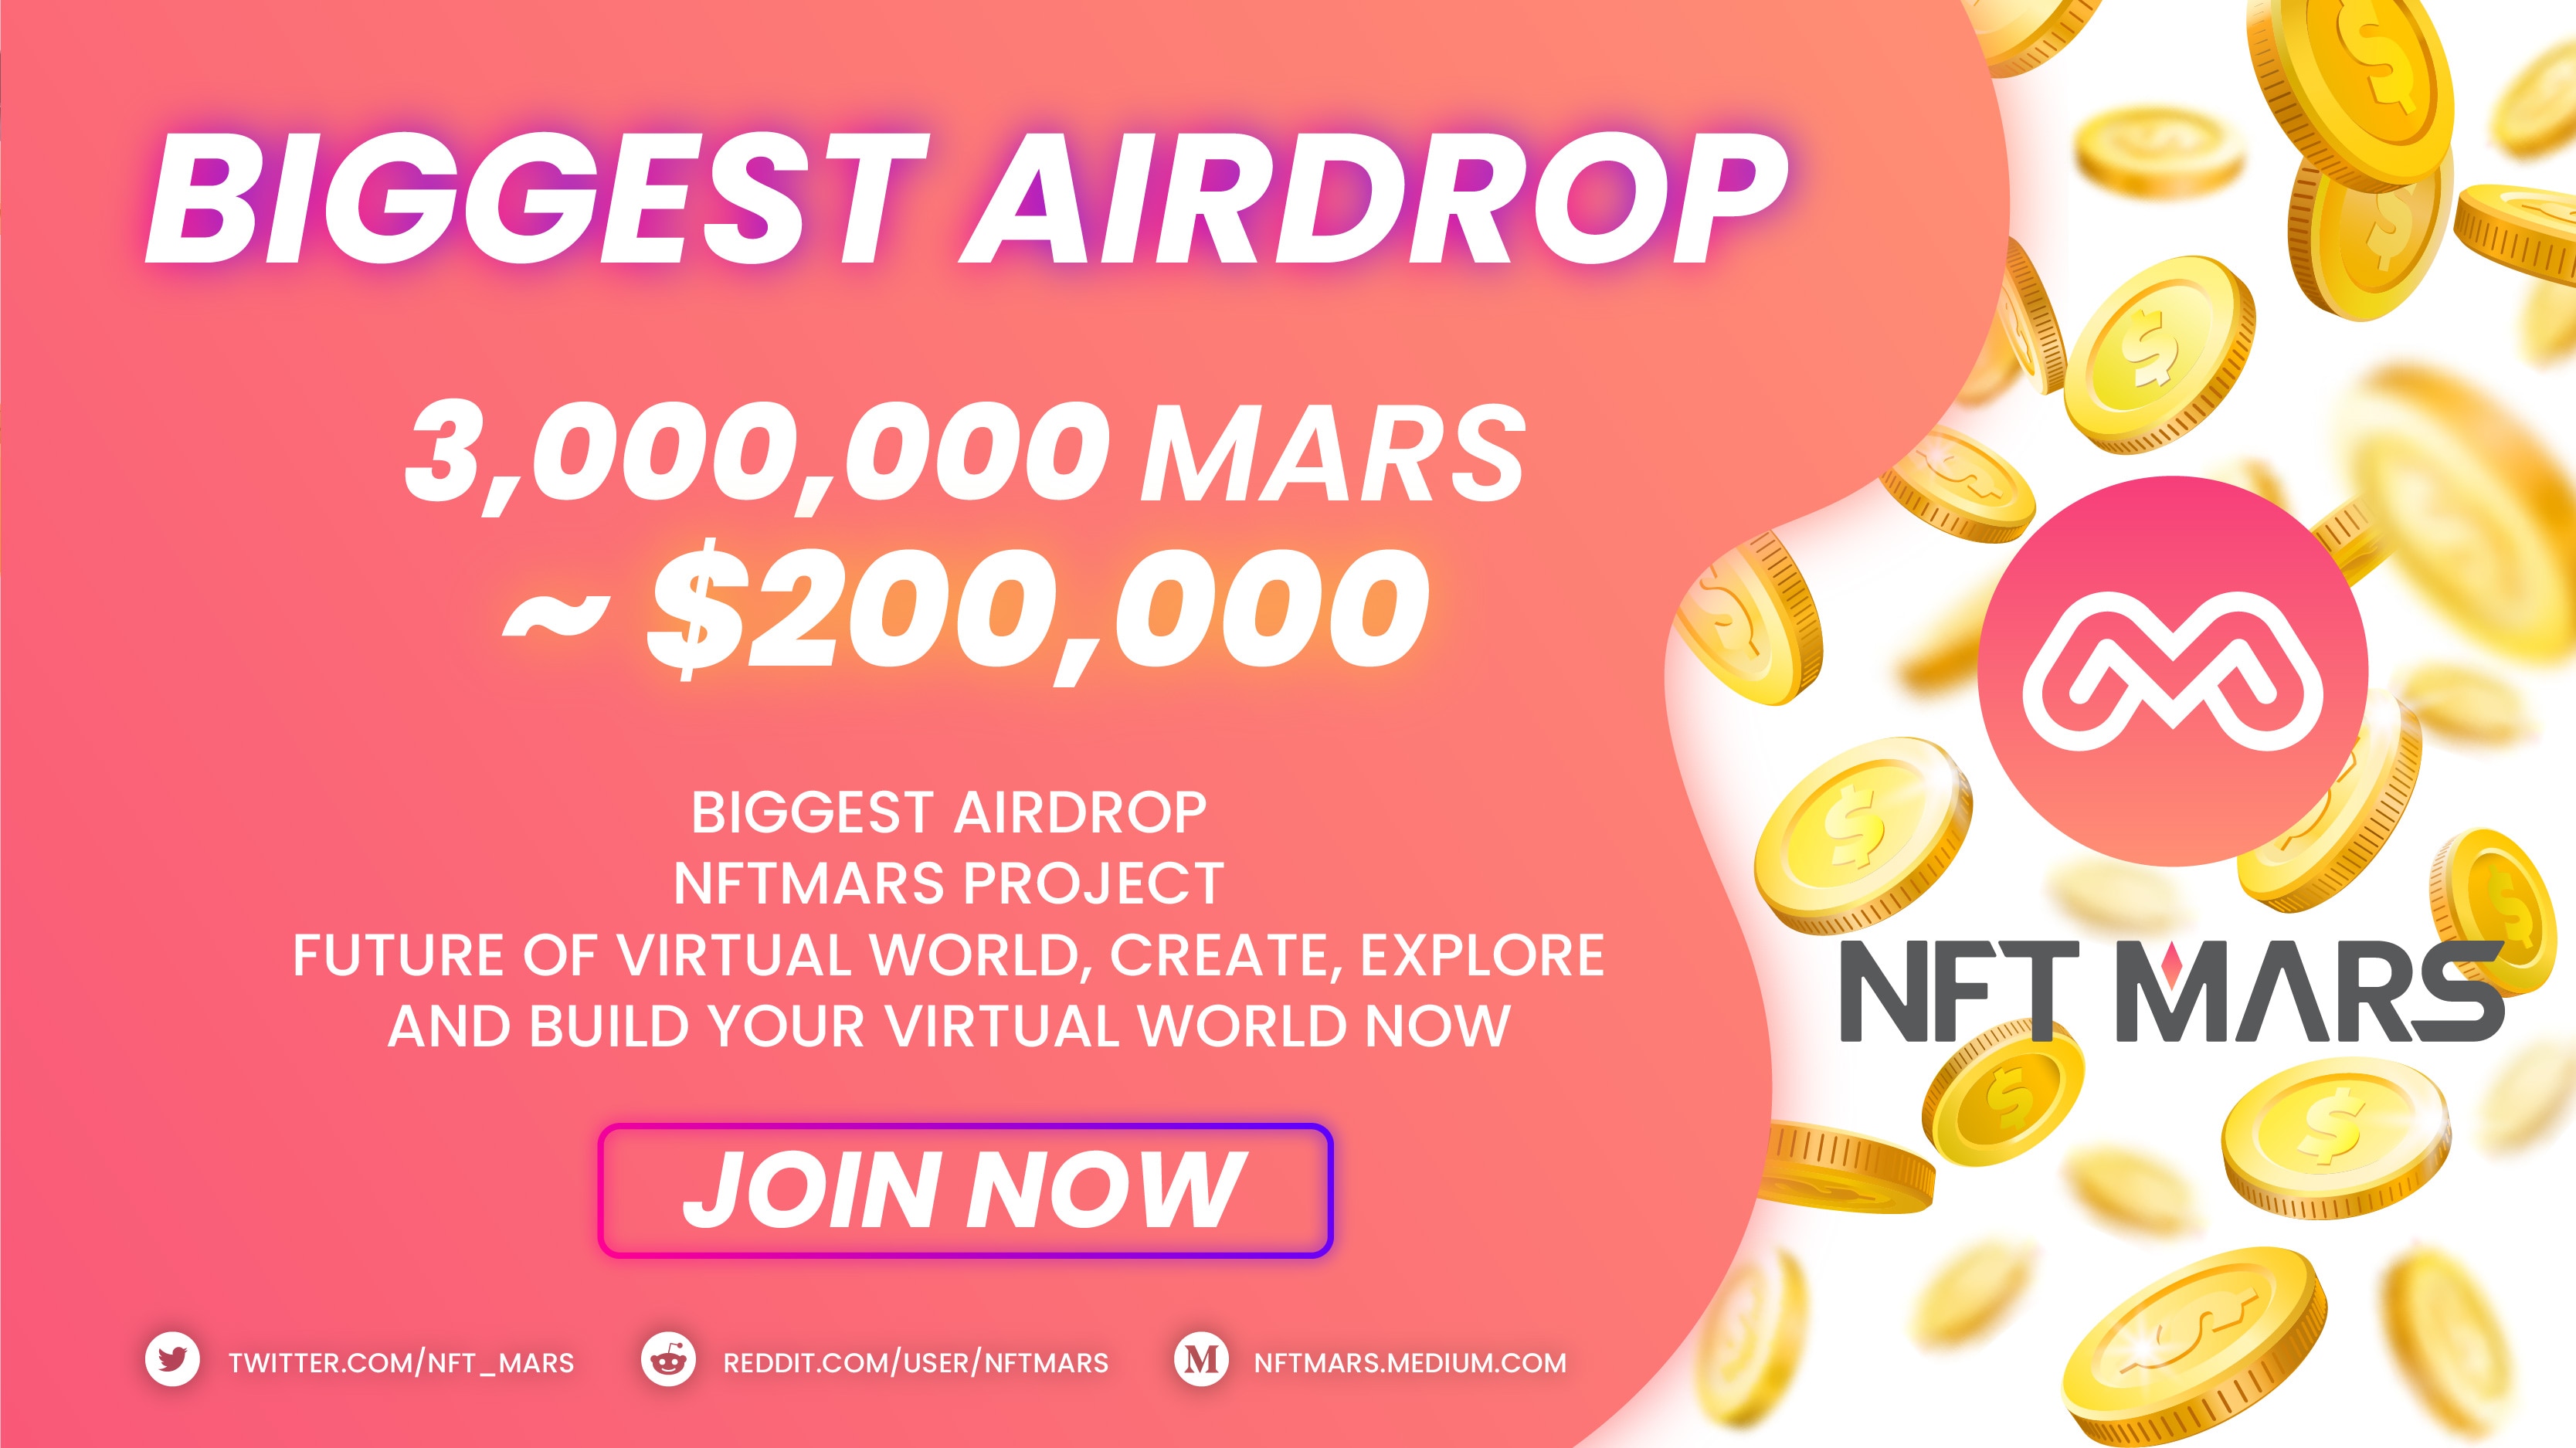 NFTMARS airdrop - Earn crypto & join the best airdrops ...